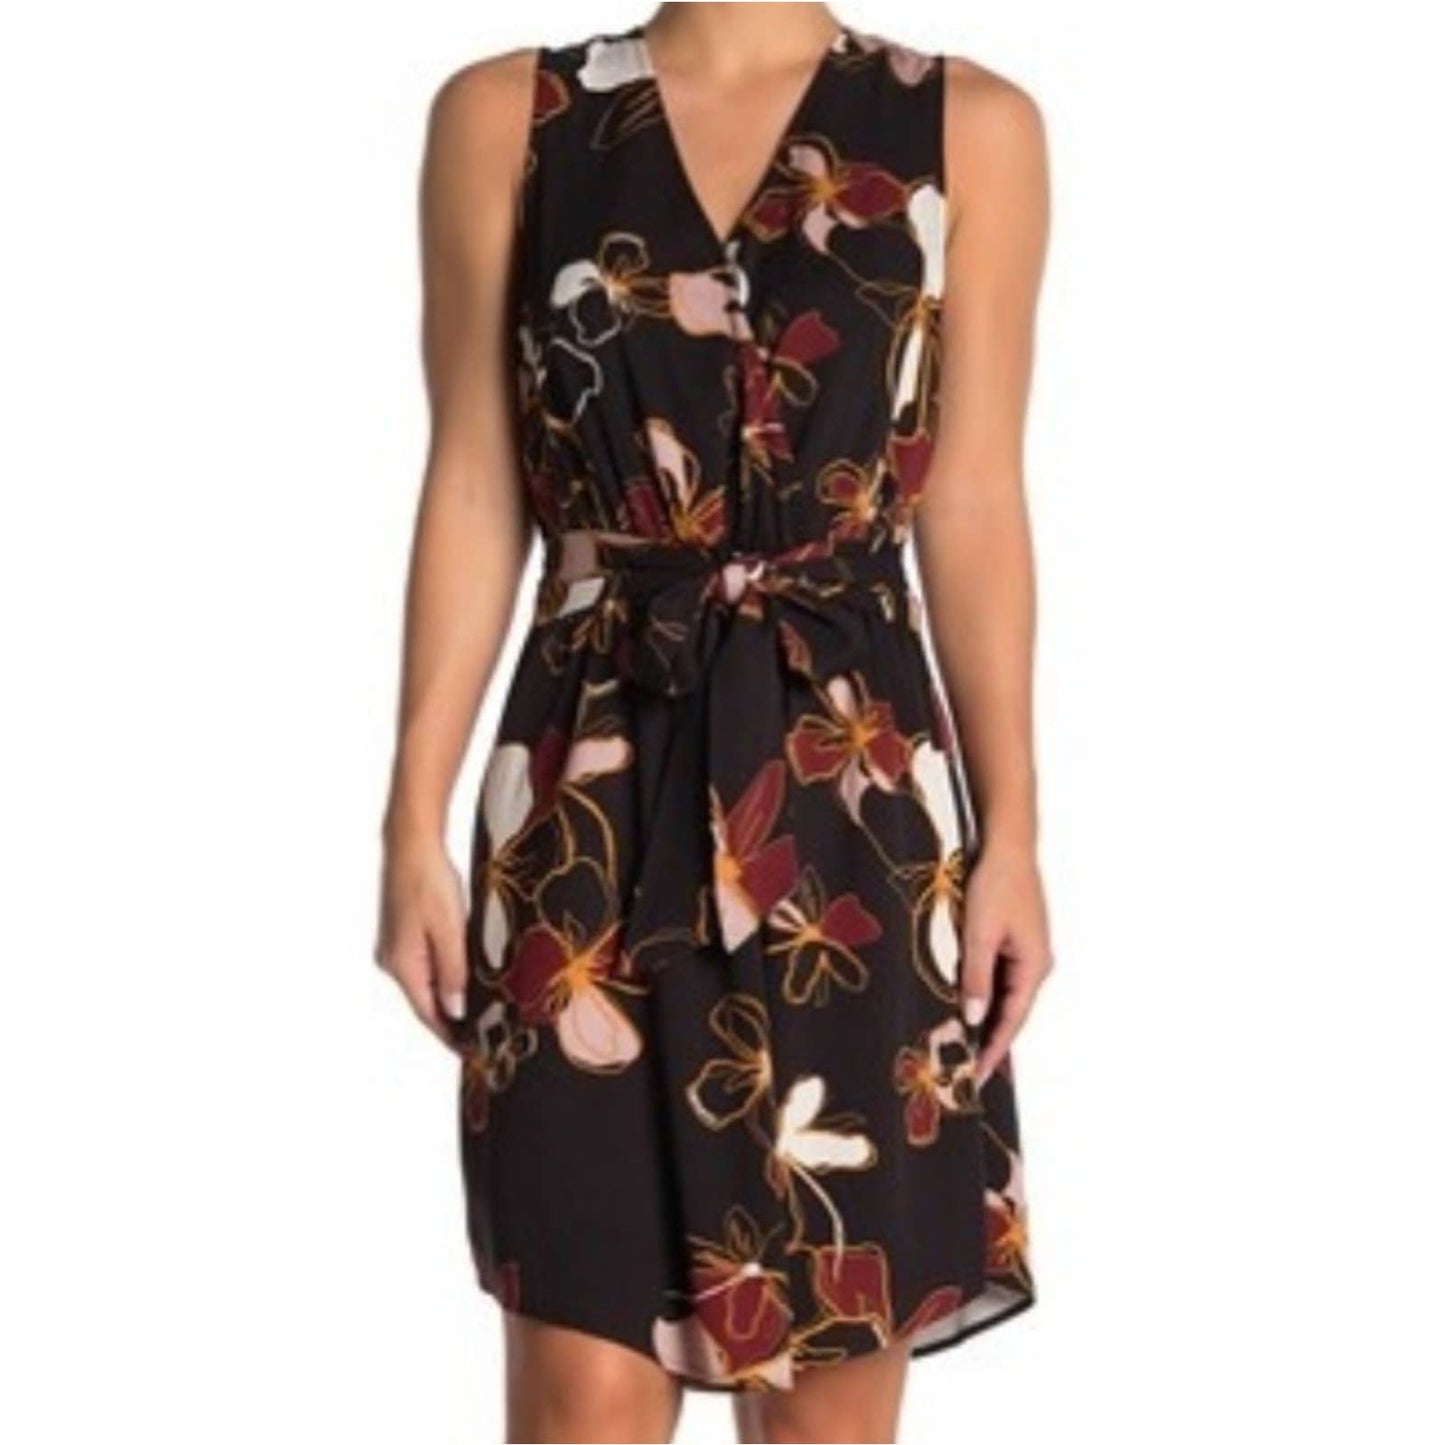 14th & Union Front Tie Floral Sleeveless Dress M